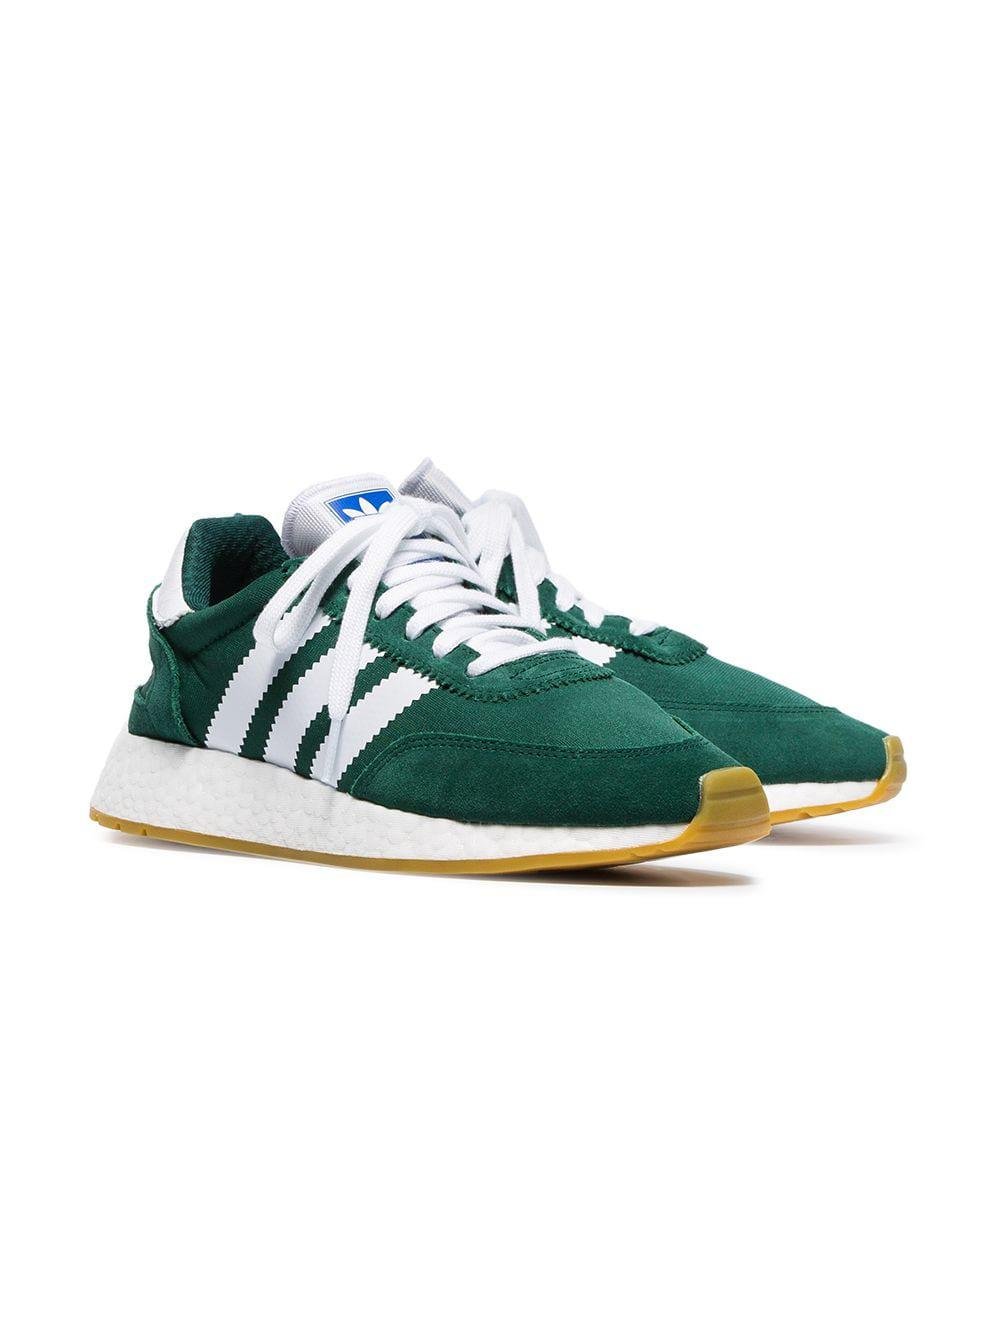 adidas Green And White I-5923 Mesh And Suede Leather Sneakers | Lyst